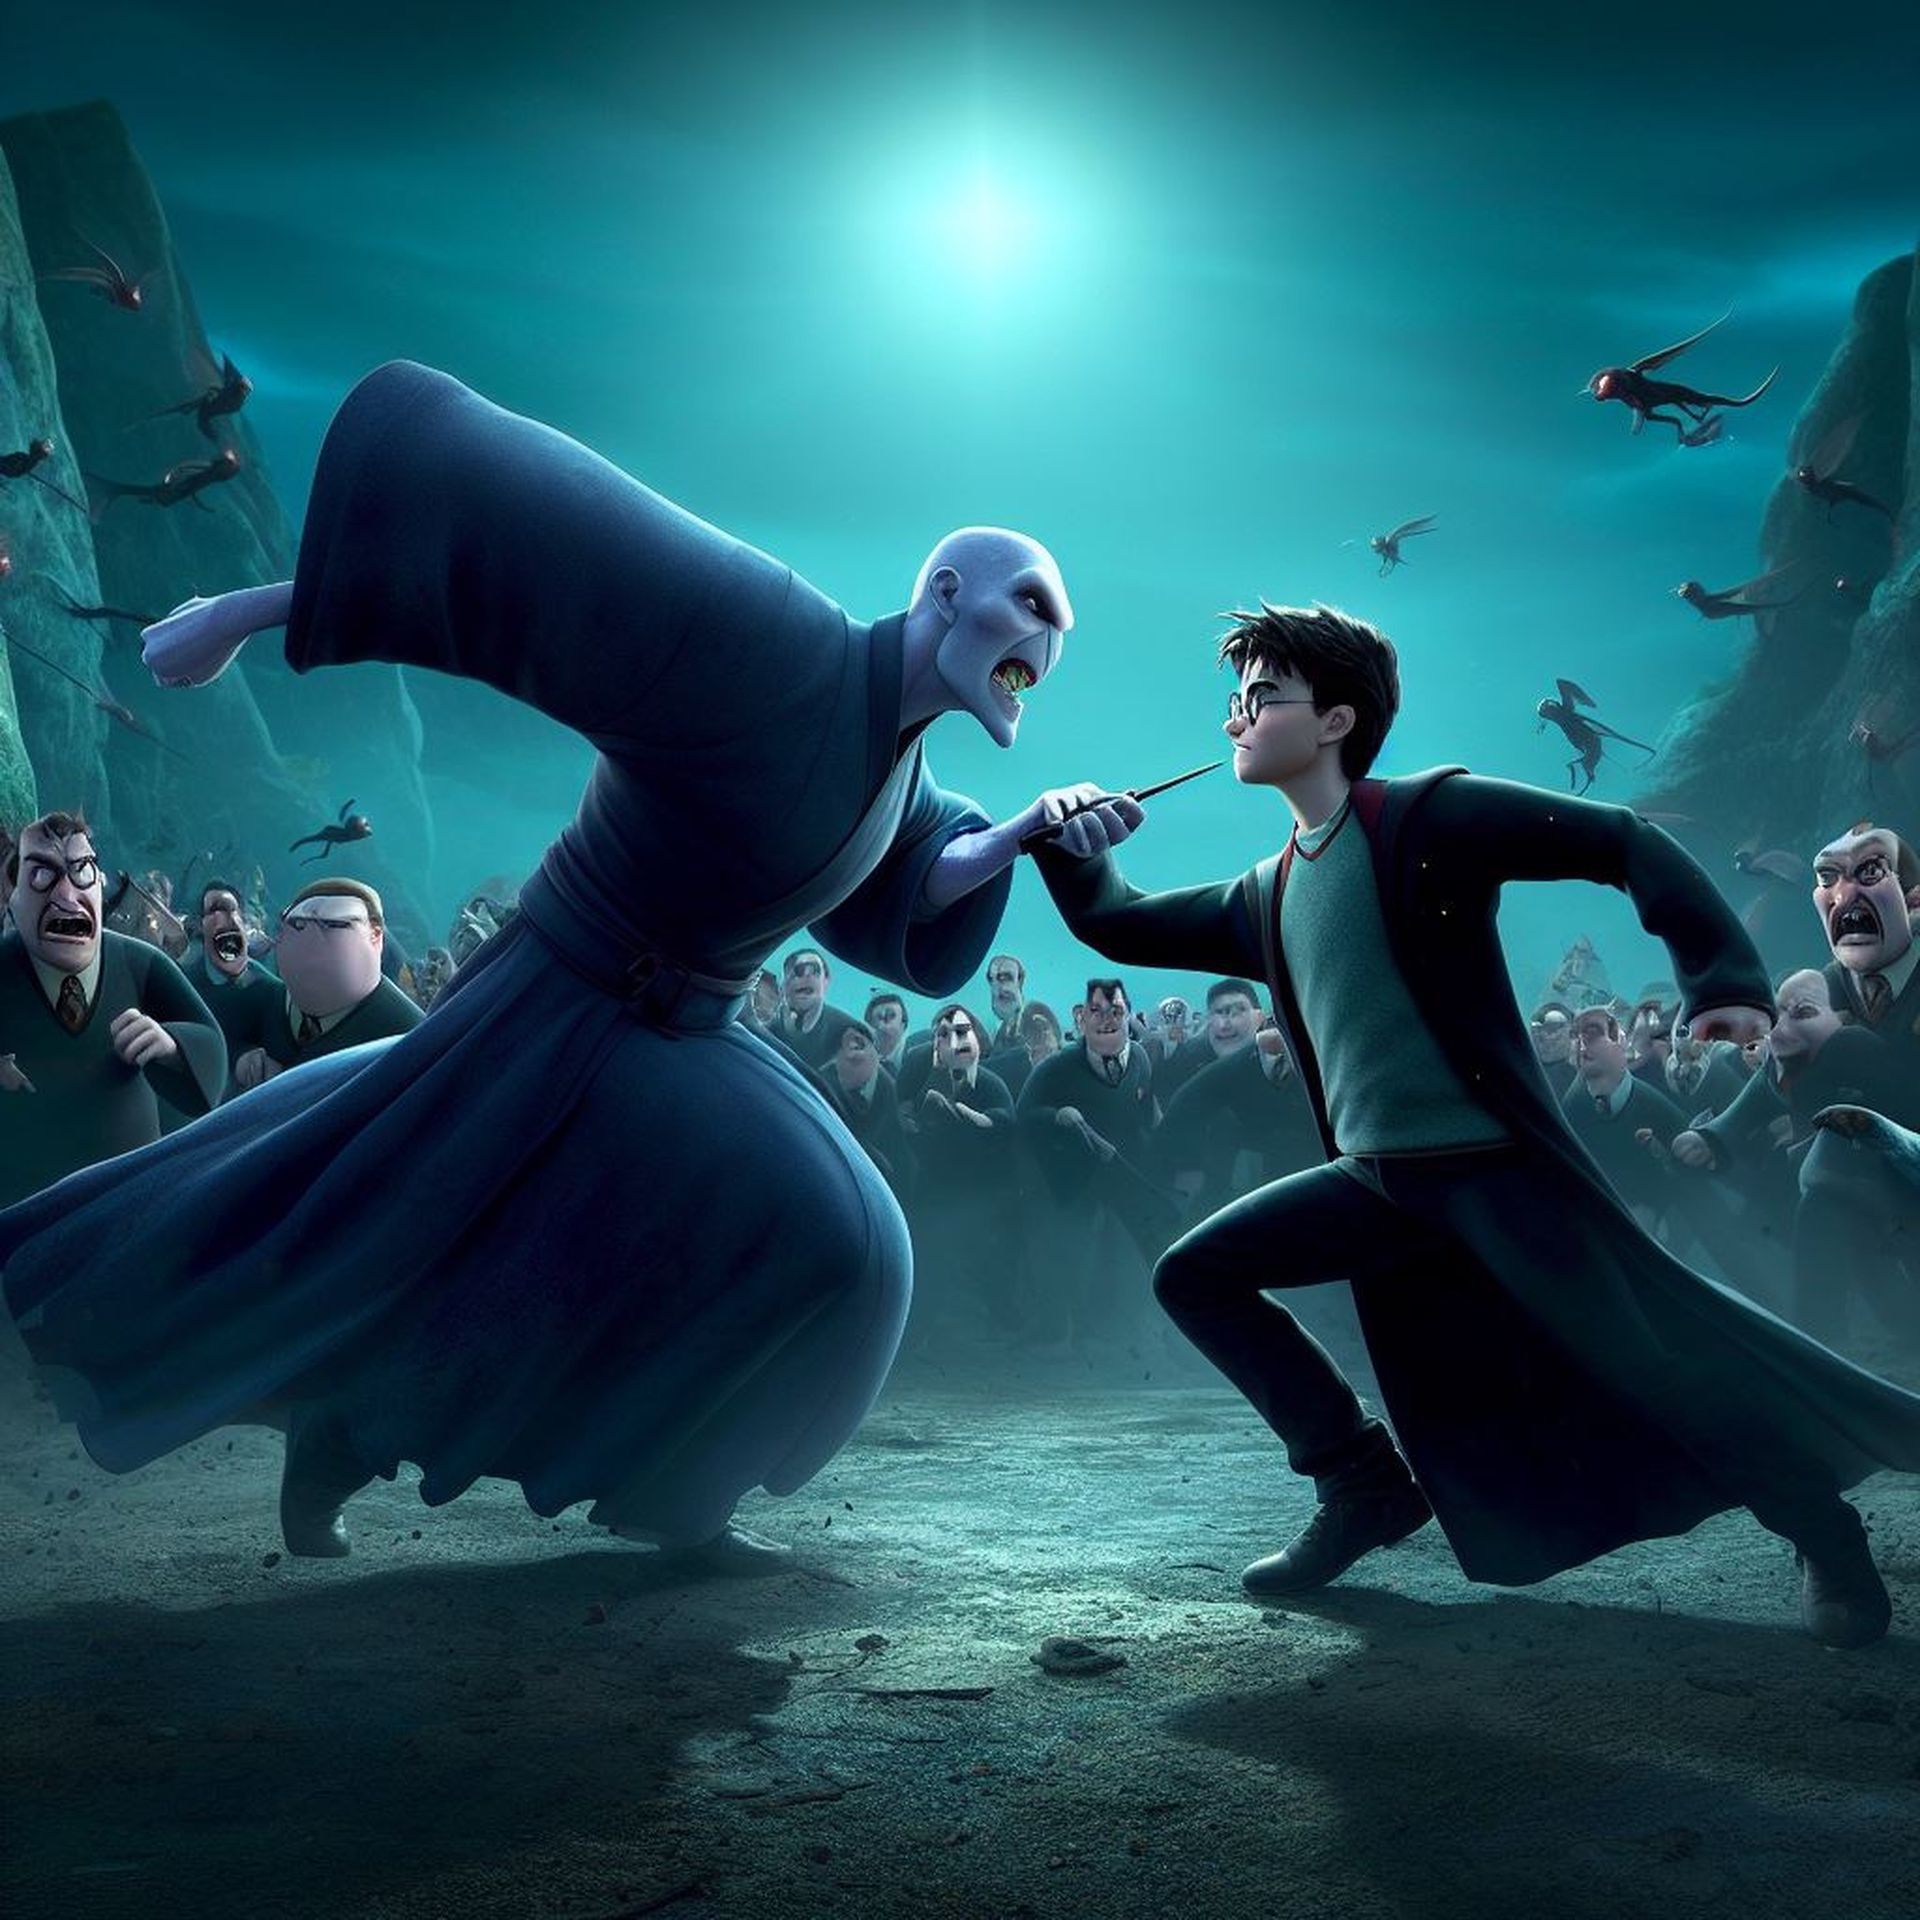 Unveil the mystery: Is the TikTok Pixar Harry Potter movie real or AI-generated? In both cases, we know how to make one. Explore now!